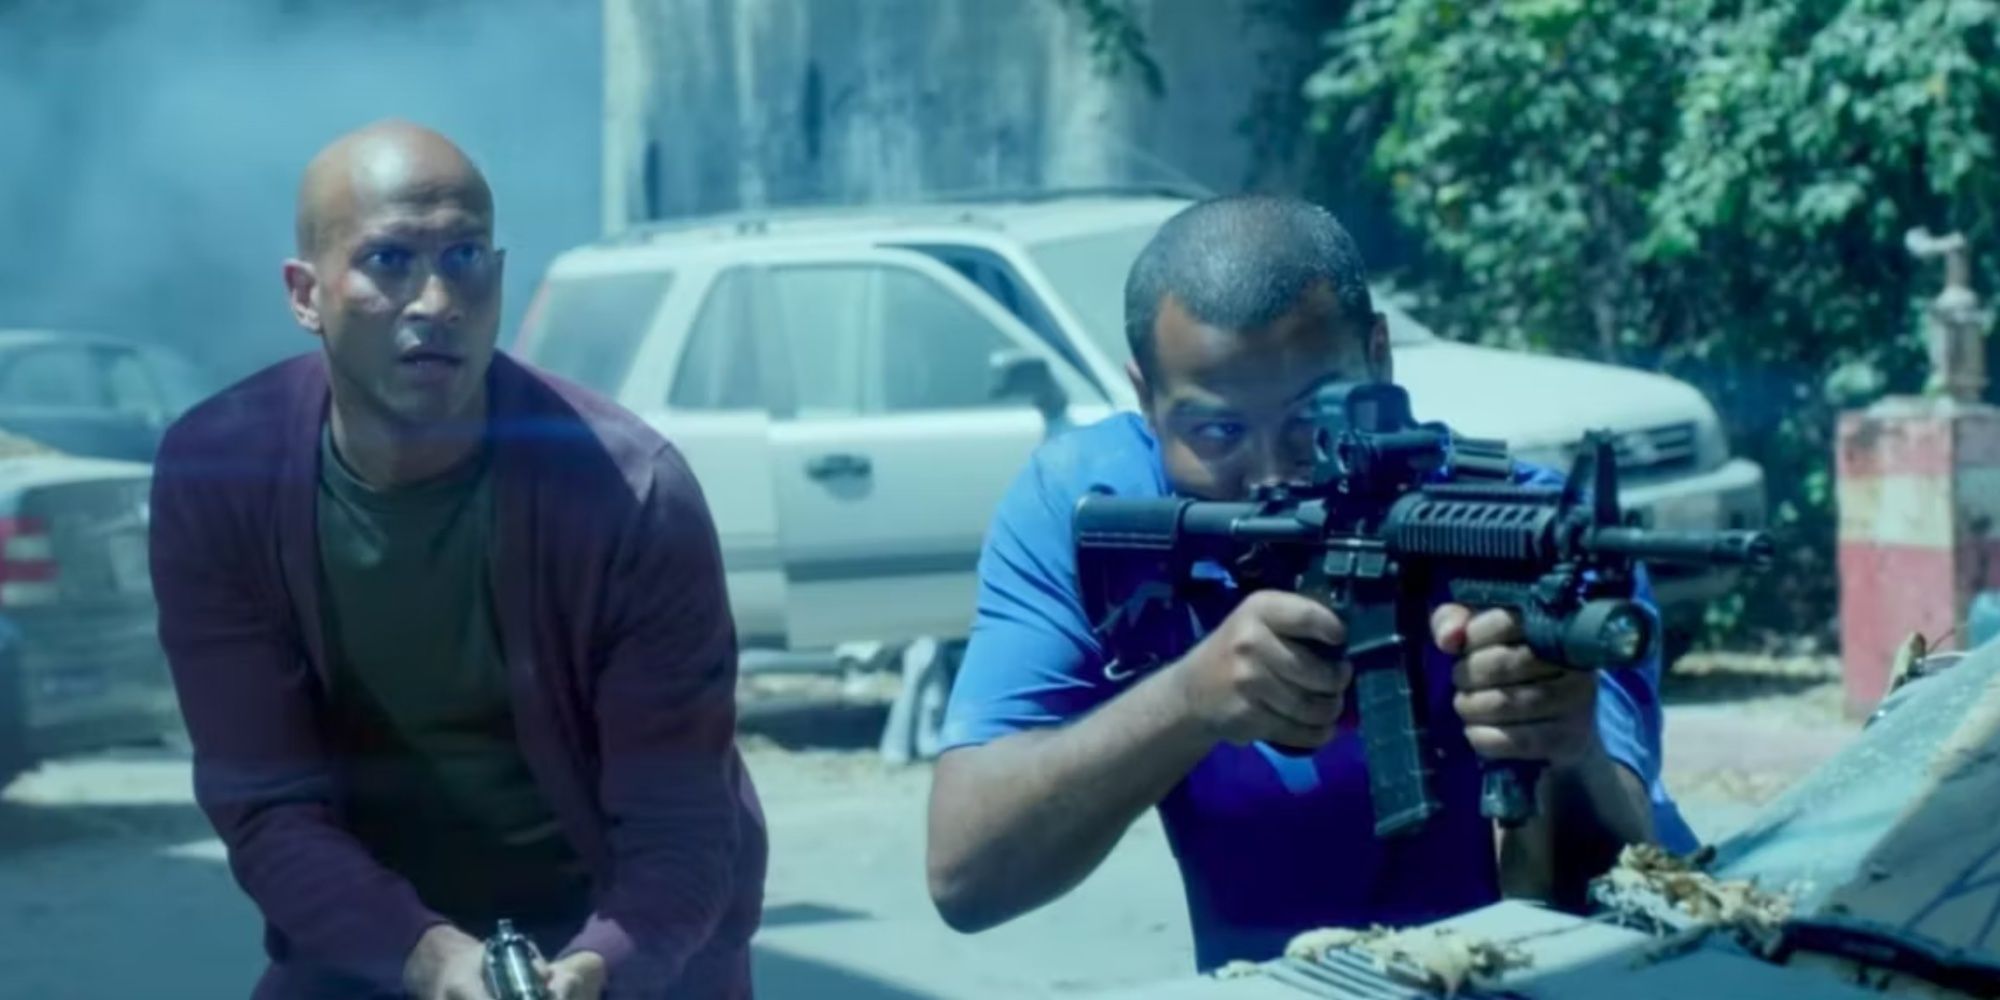 Key and Peele with guns as Alien Inposters in Key and Peele